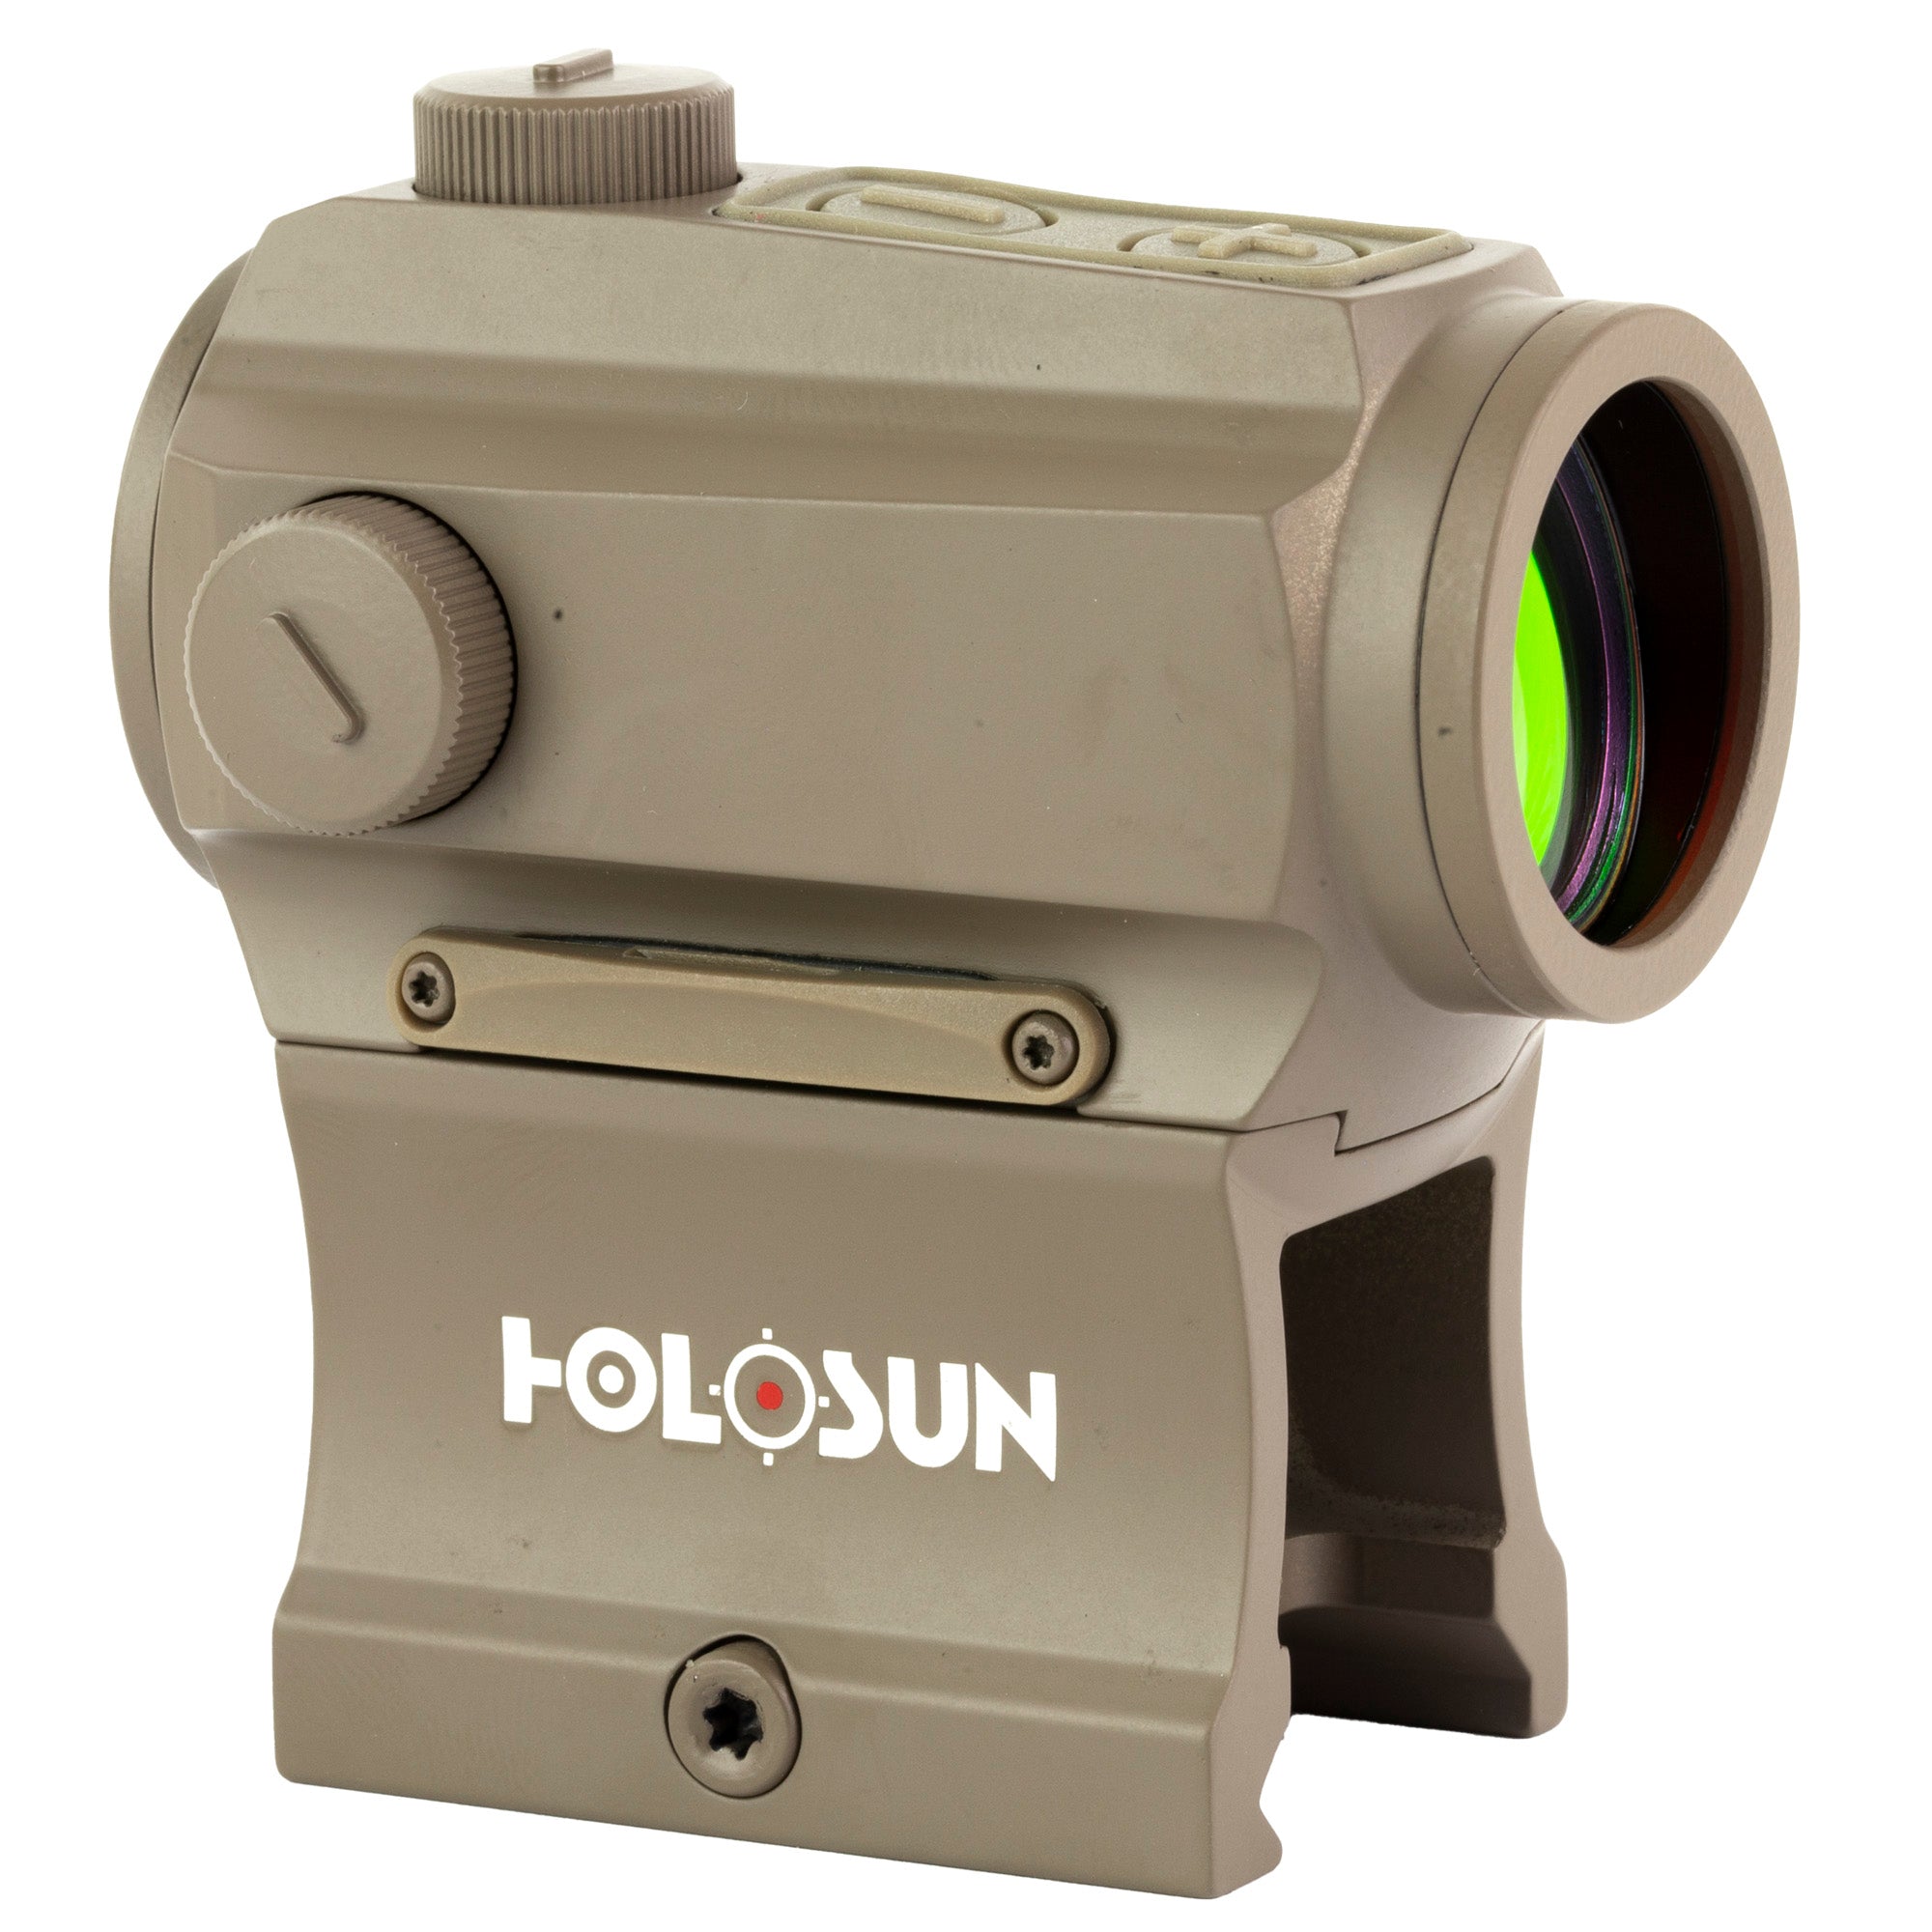 Holosun 403B FDE Red Dot 2 MOA High and Low Mount Bottom Battery Tray - HS403B-FDE